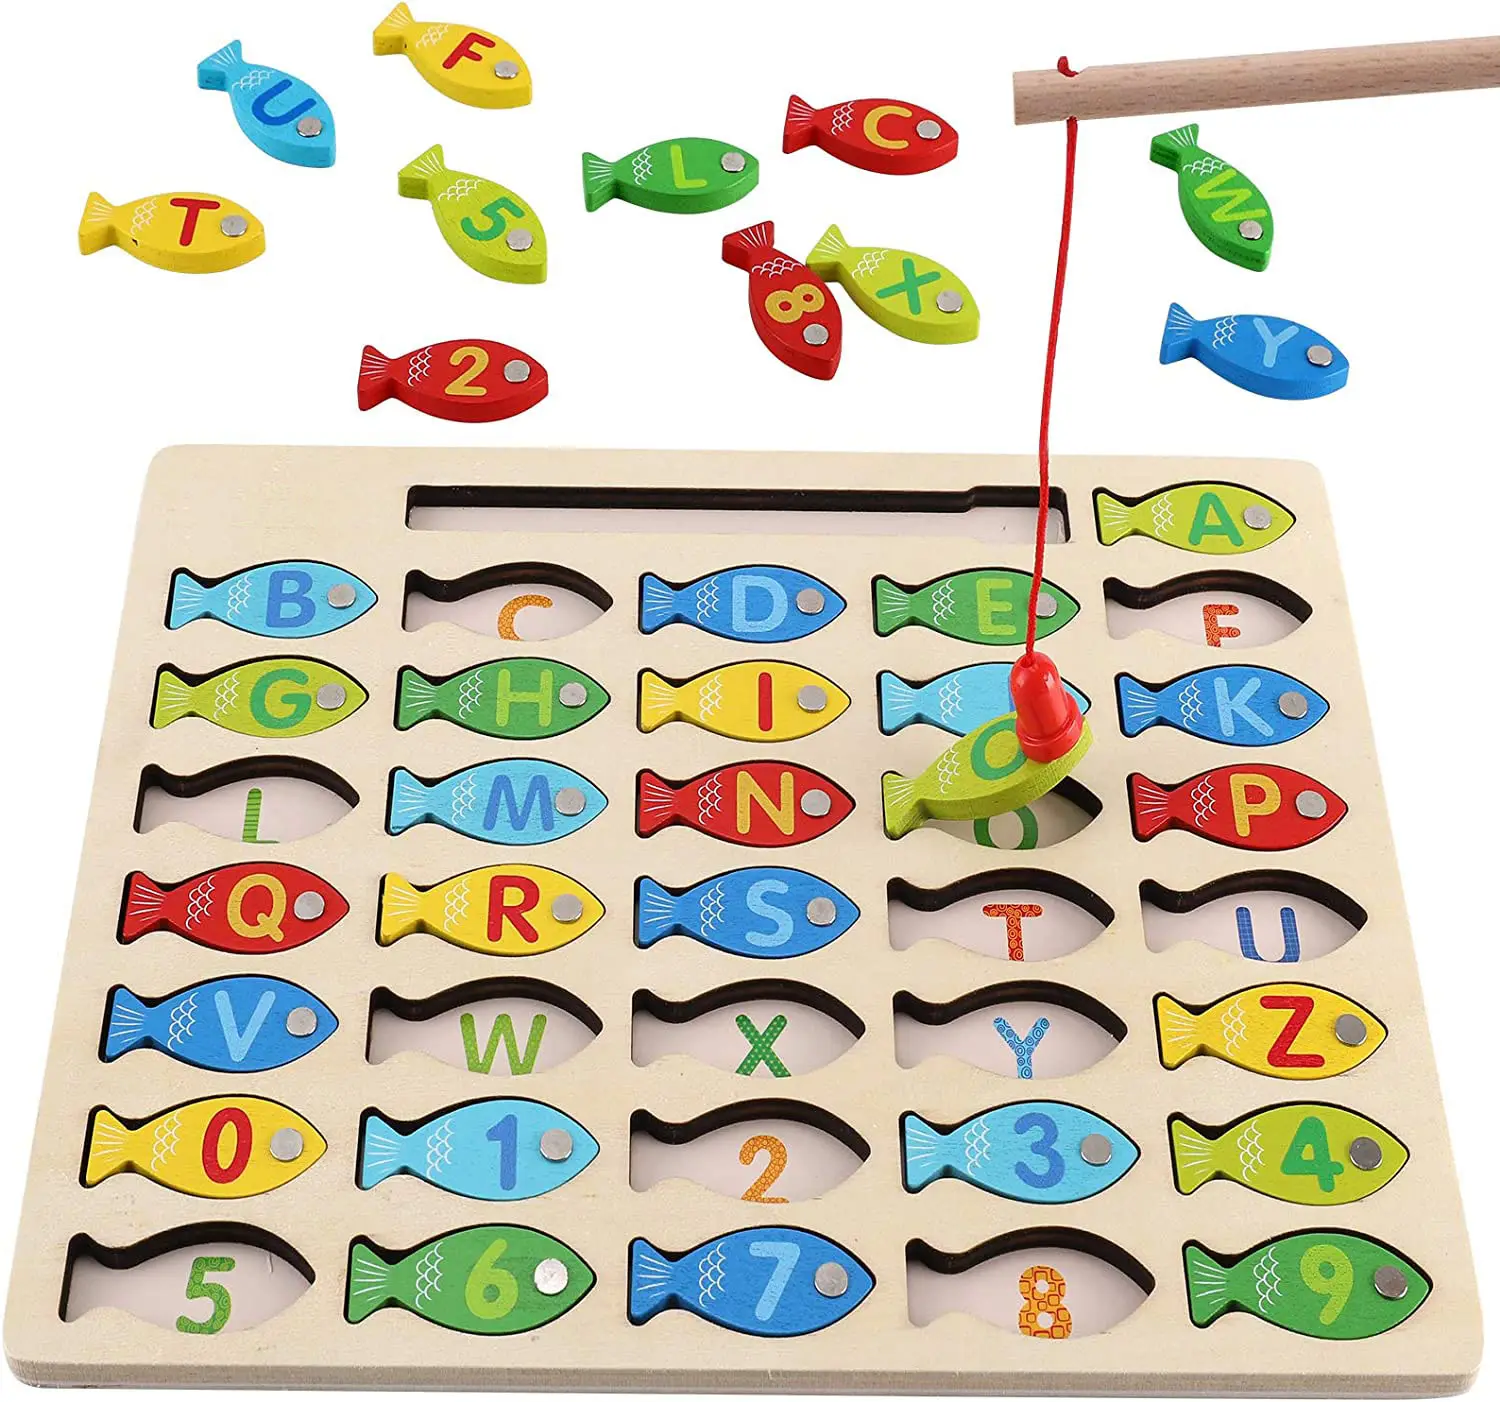 Custom-crafted Top Quality Colorful Wooden Toys Fishing Games Puzzle with Number and Letter for Kids